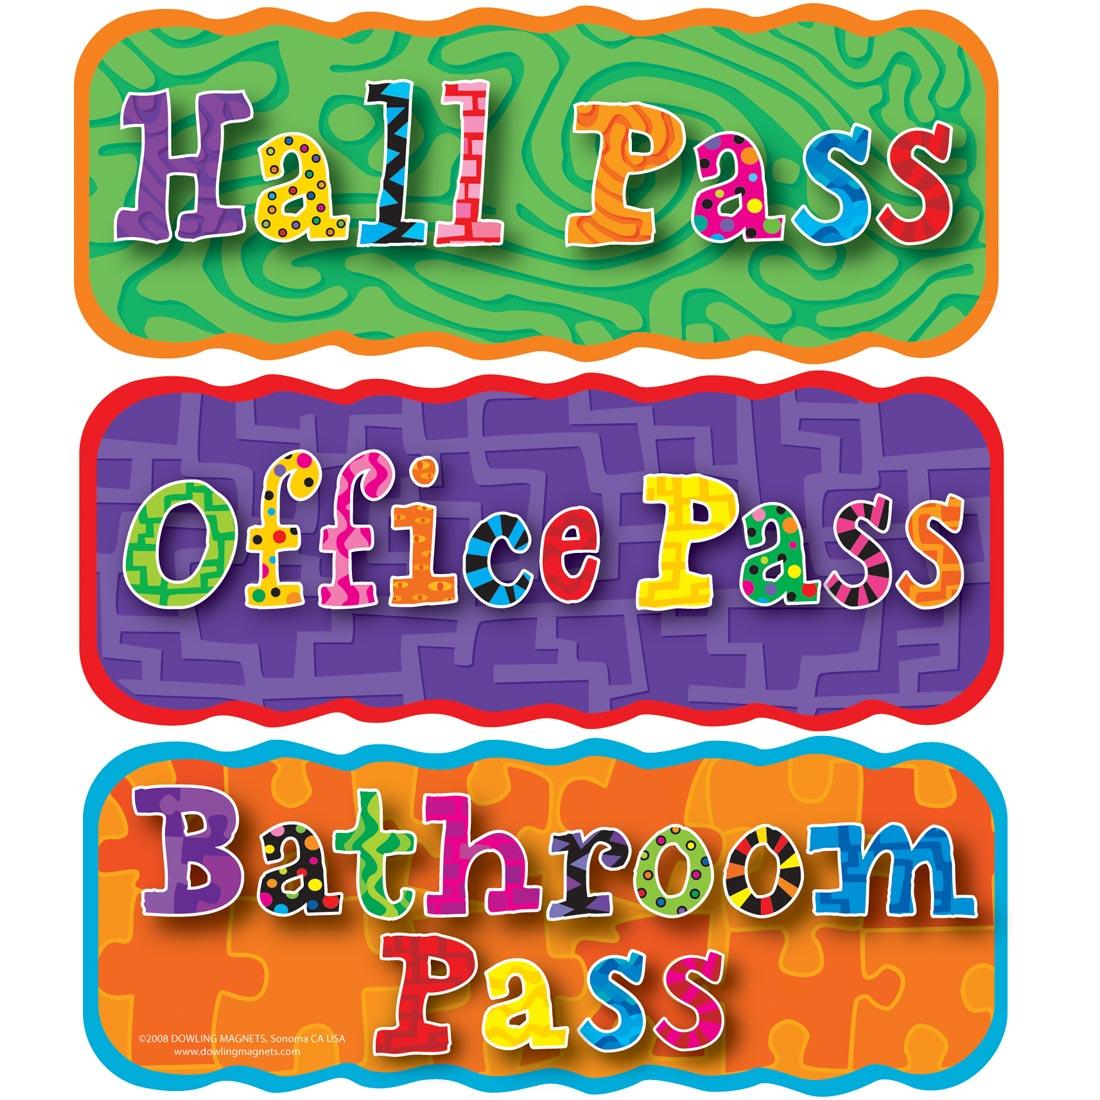 Magnetic Hall Passes by Dowling Magnets include Hall Pass, Office Pass and Bathroom Pass